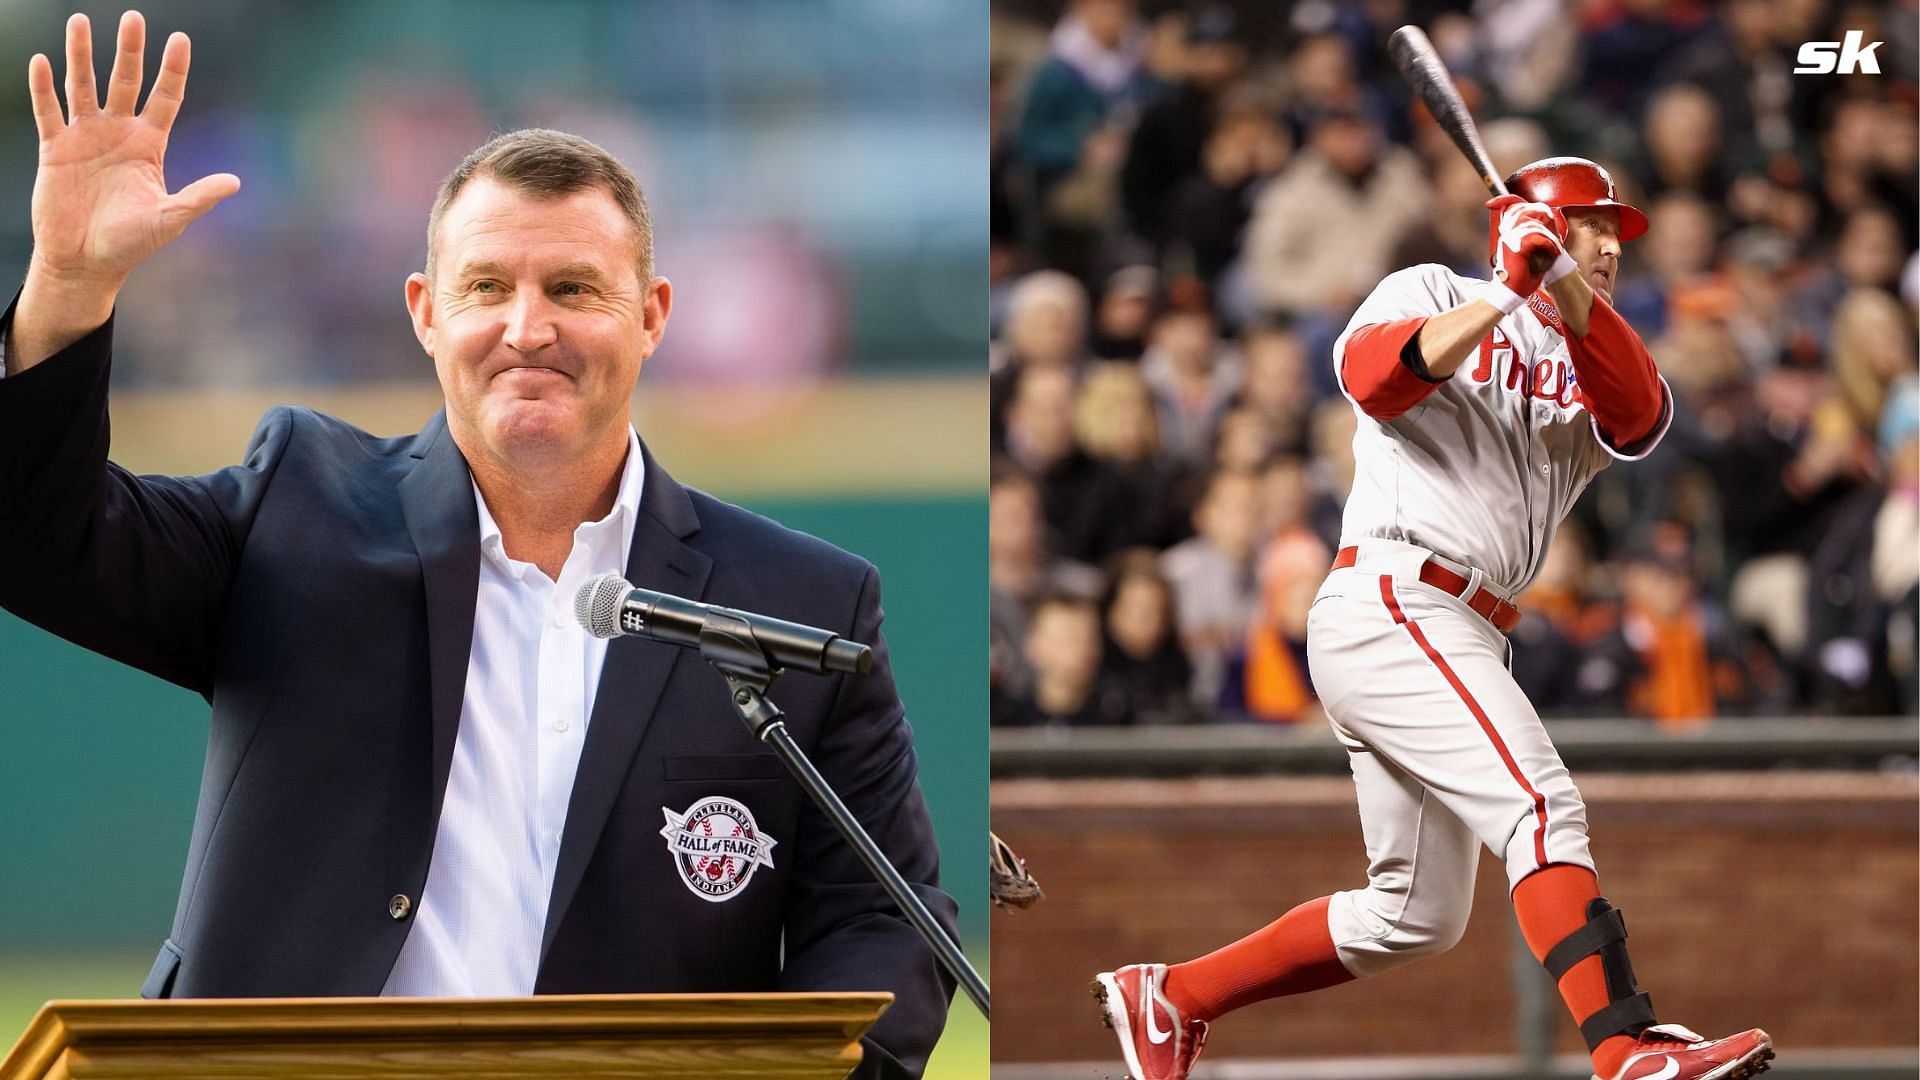 Jim Thome joins the greats in the Baseball Hall of Fame